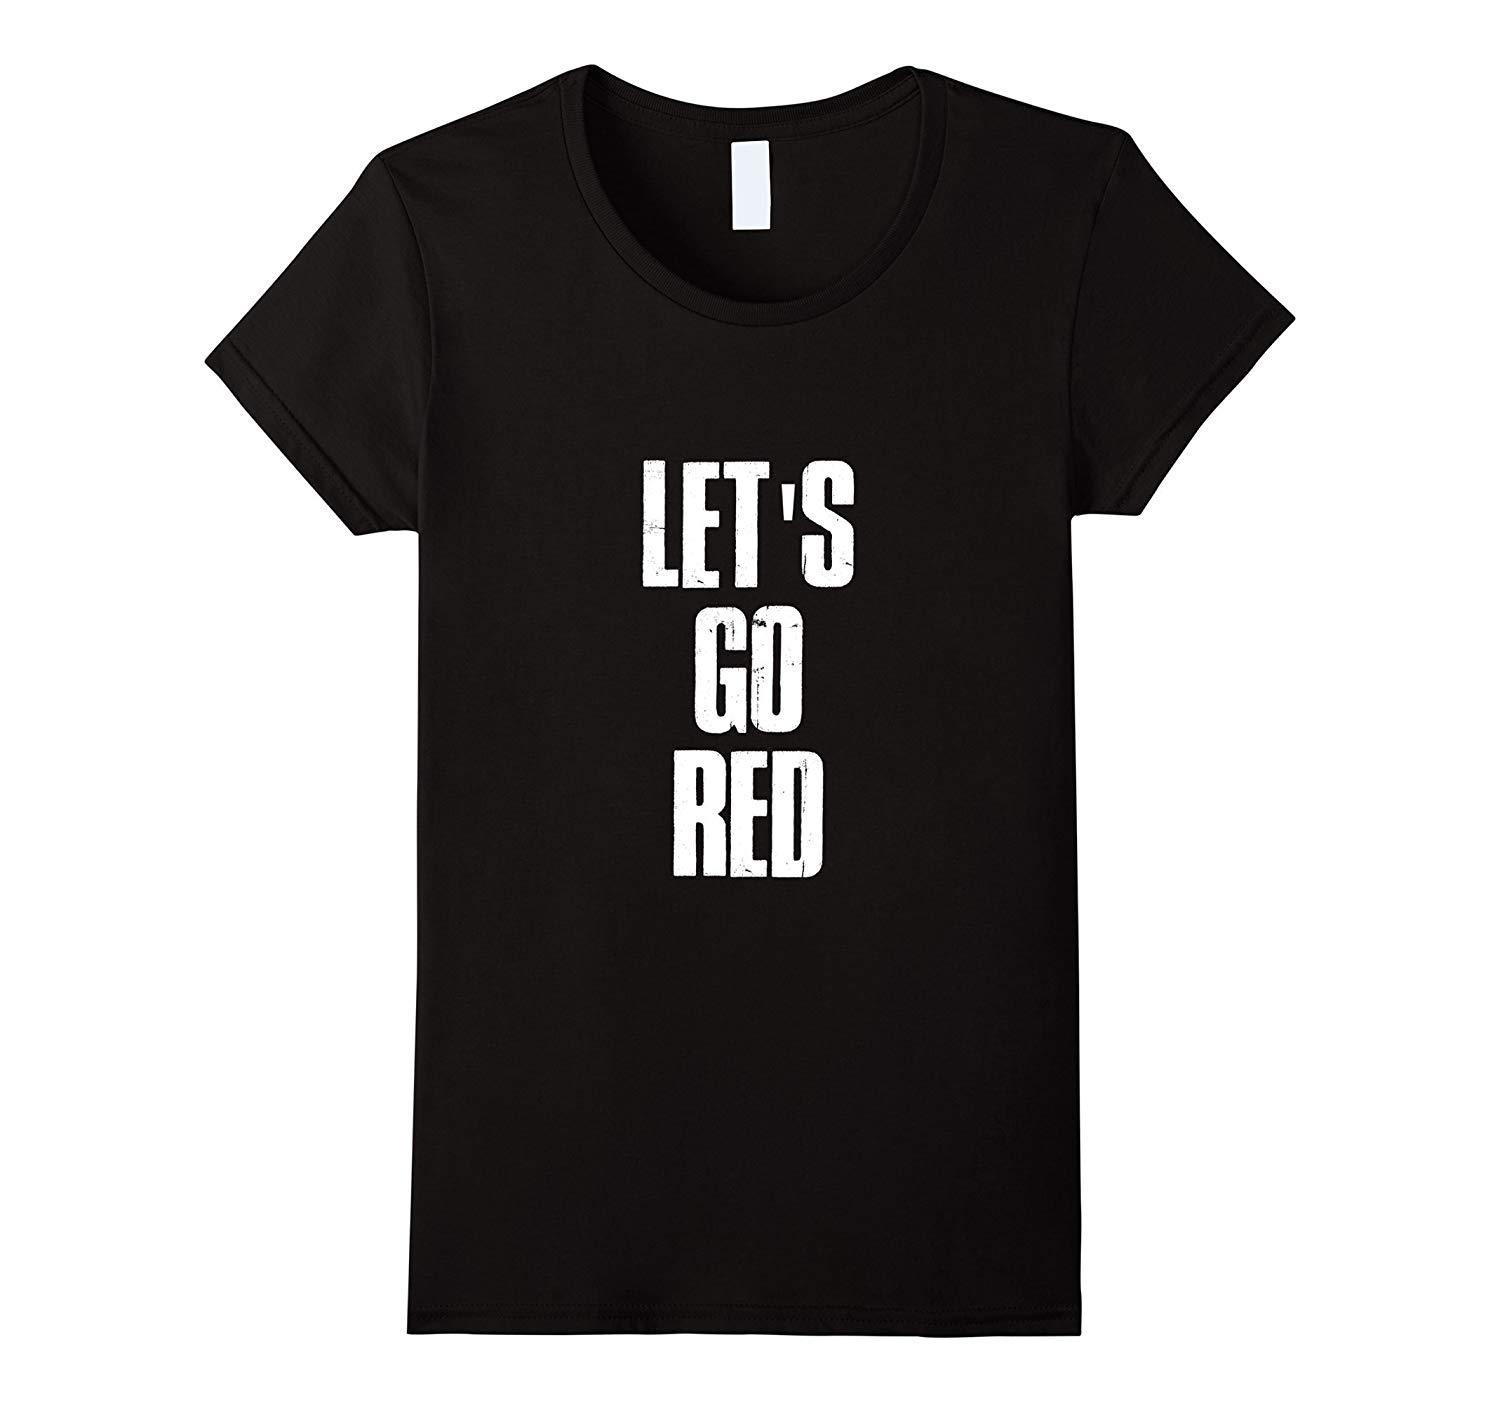 New Shirts - Let's go red Shirts Wowen - Tops